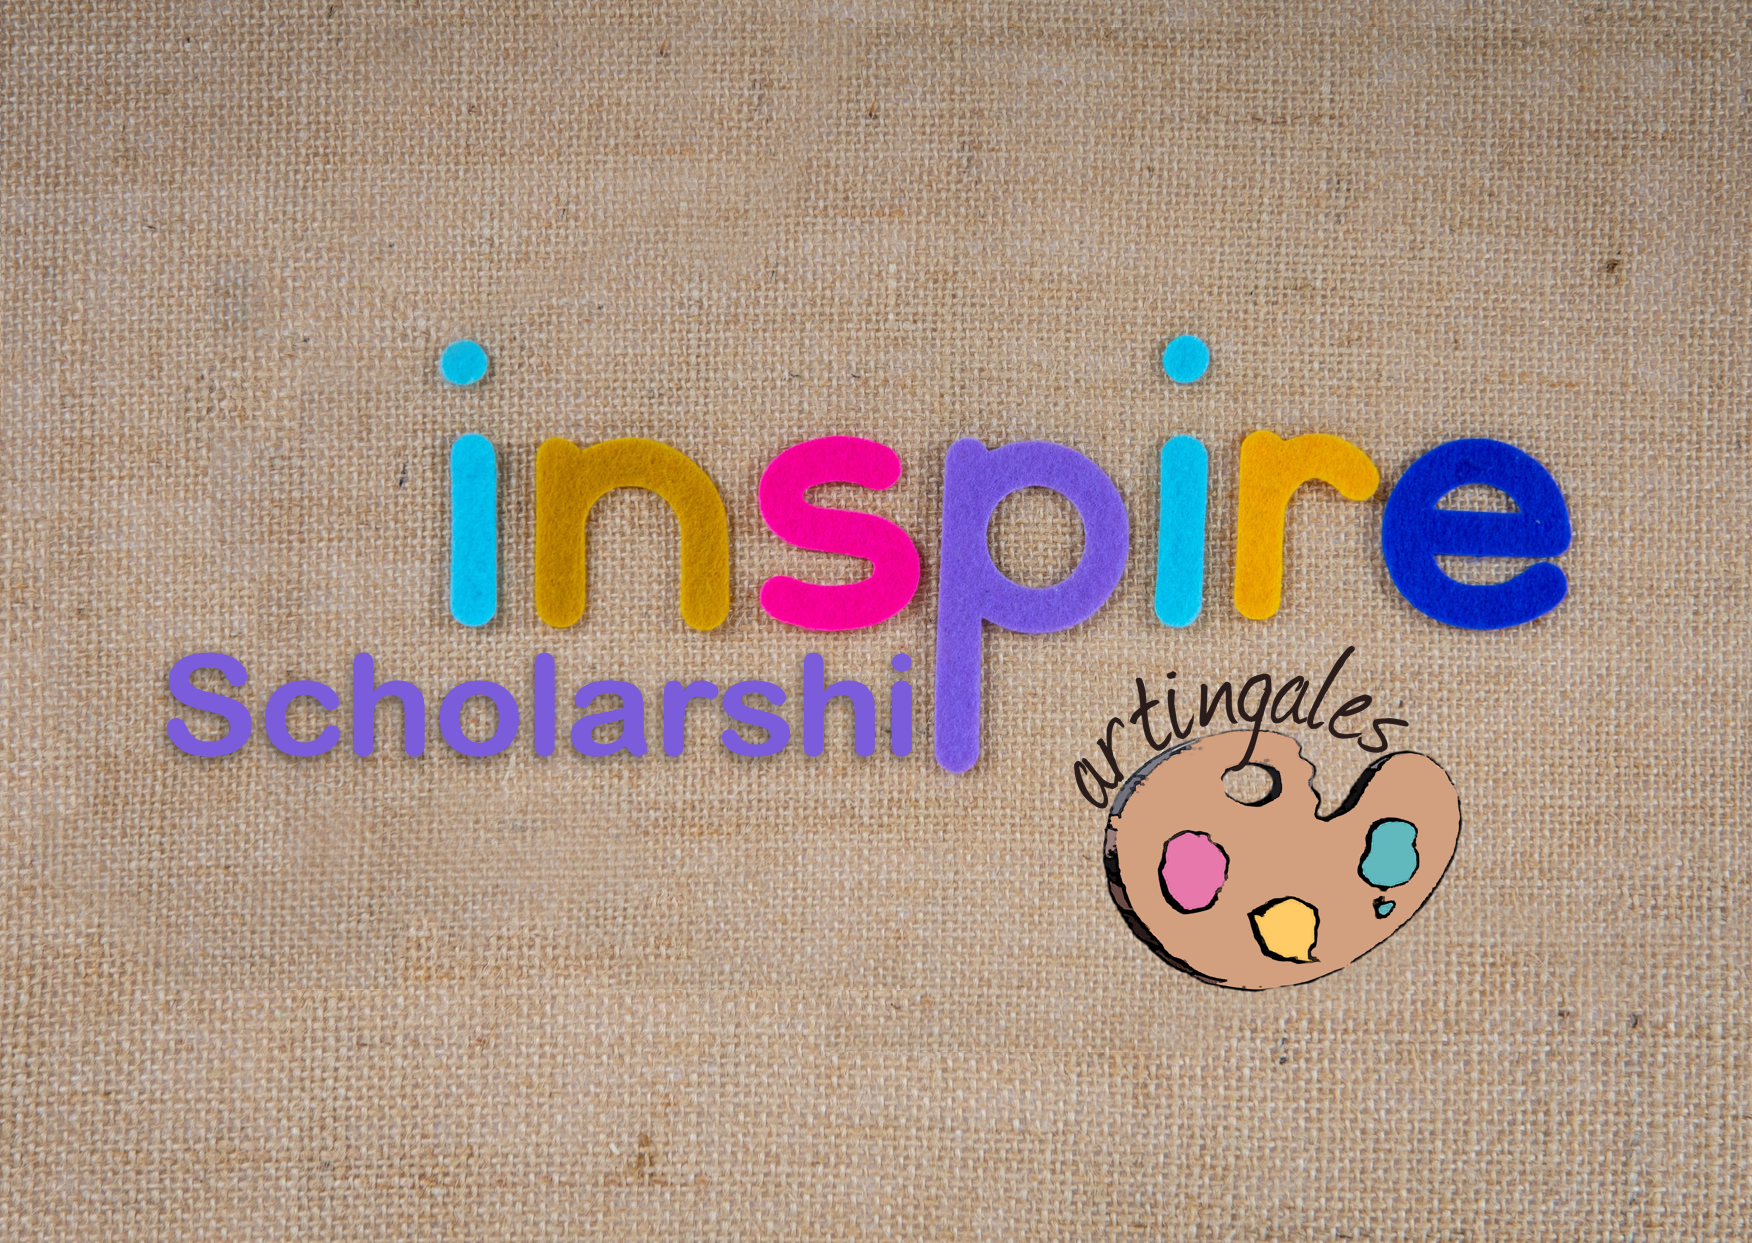 colorful inspire scholarship image with Artingales logo